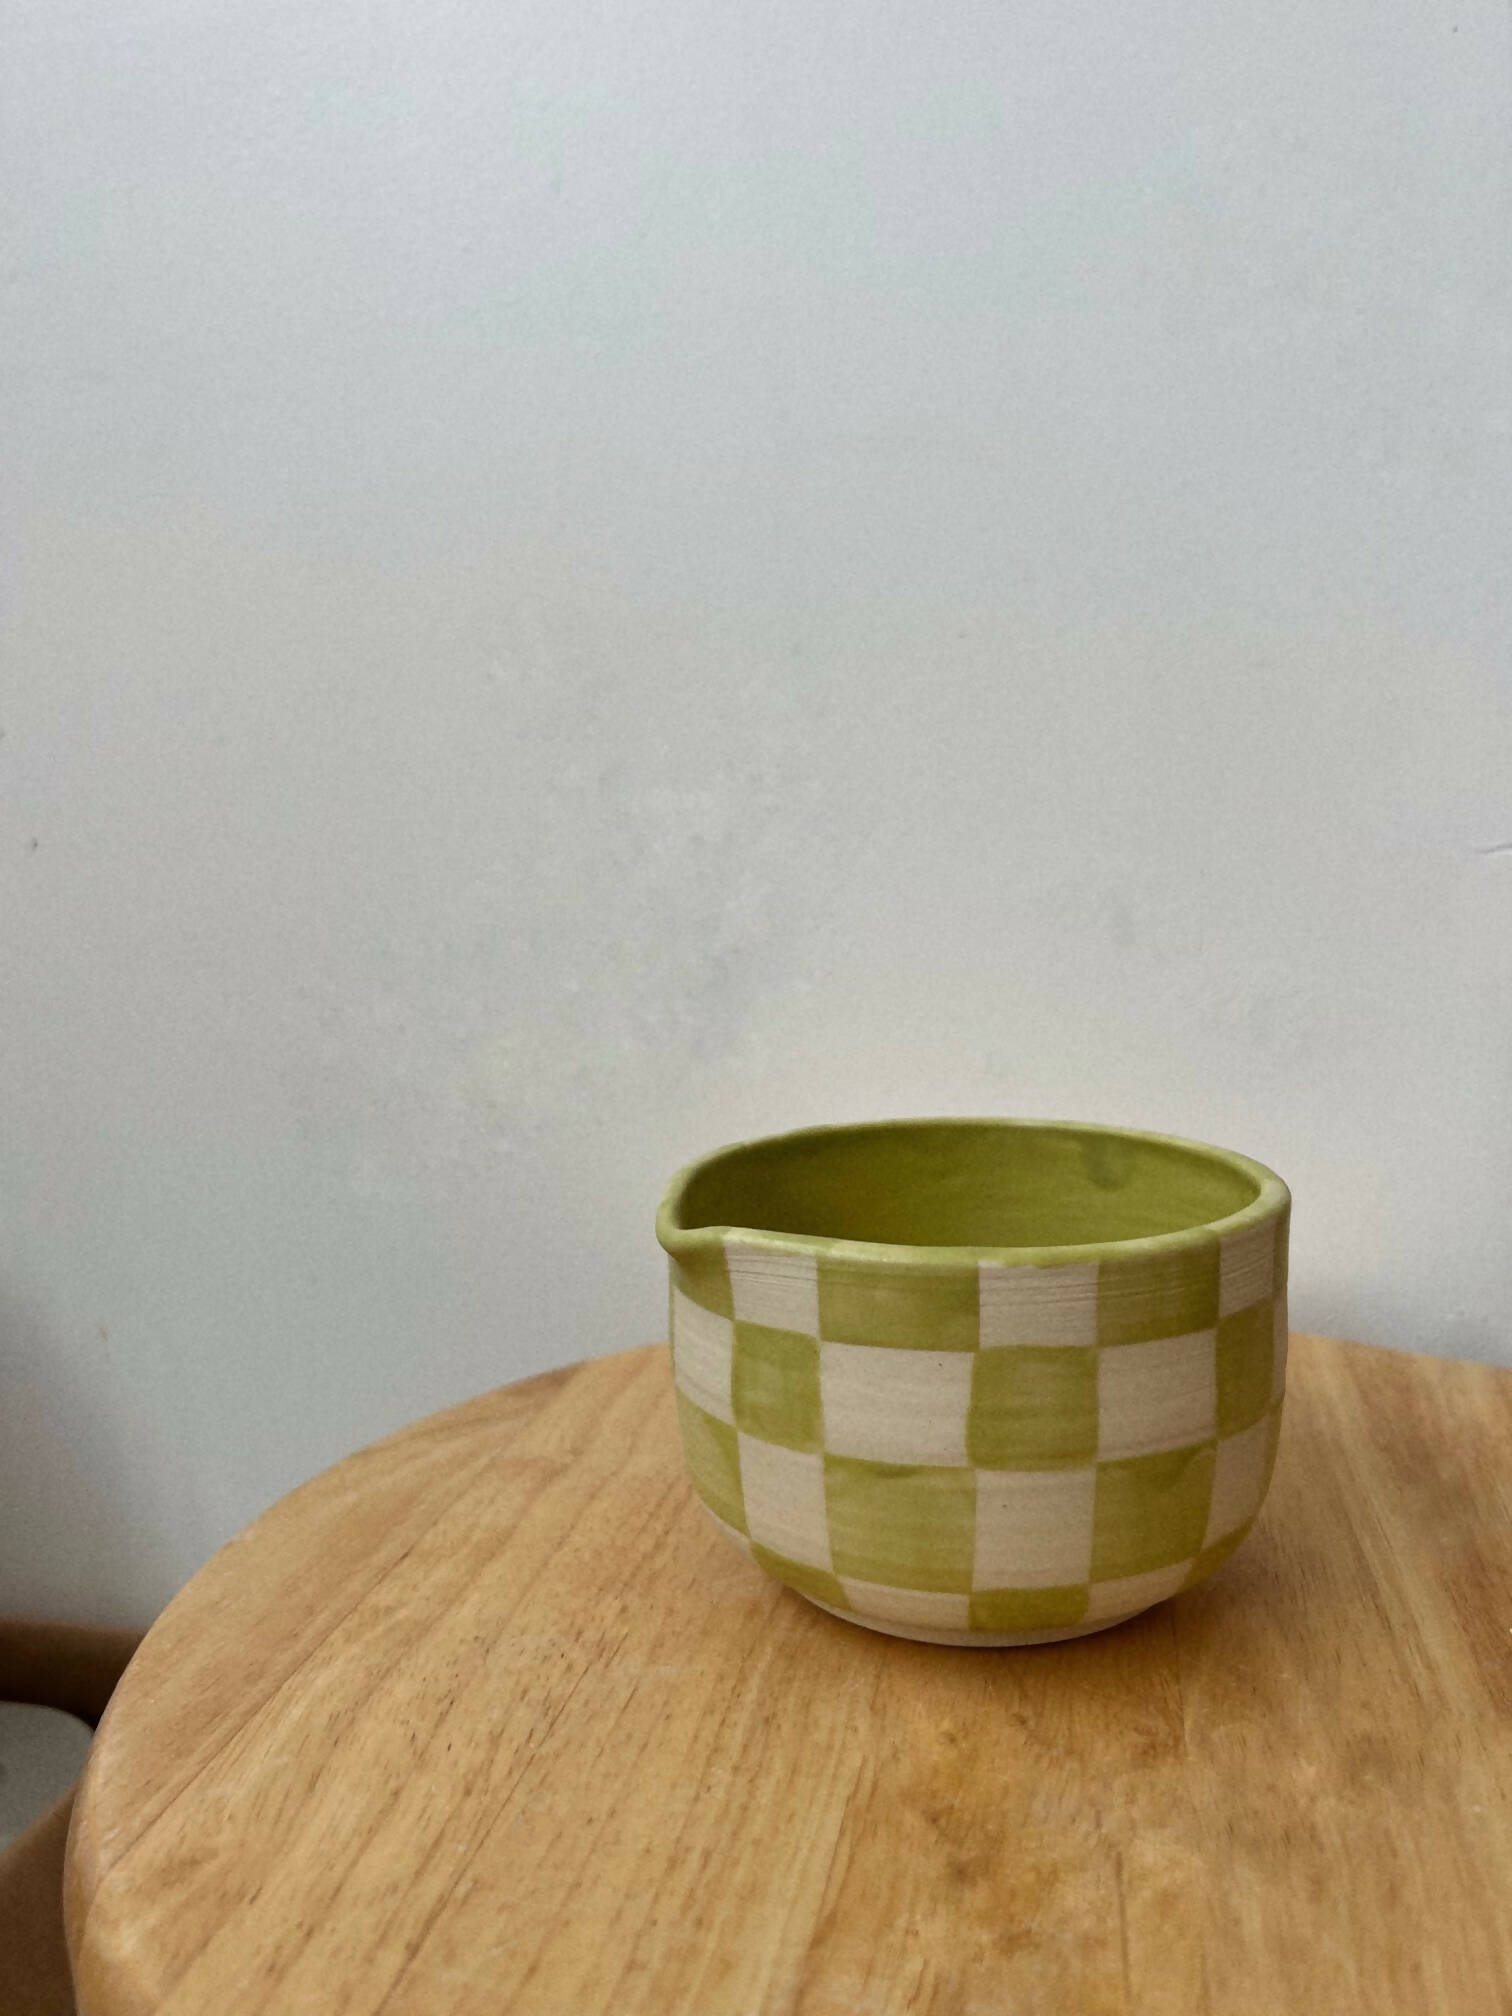 spring checkered matcha bowl and cup set! 🌷🌸🤍 with a mint chip